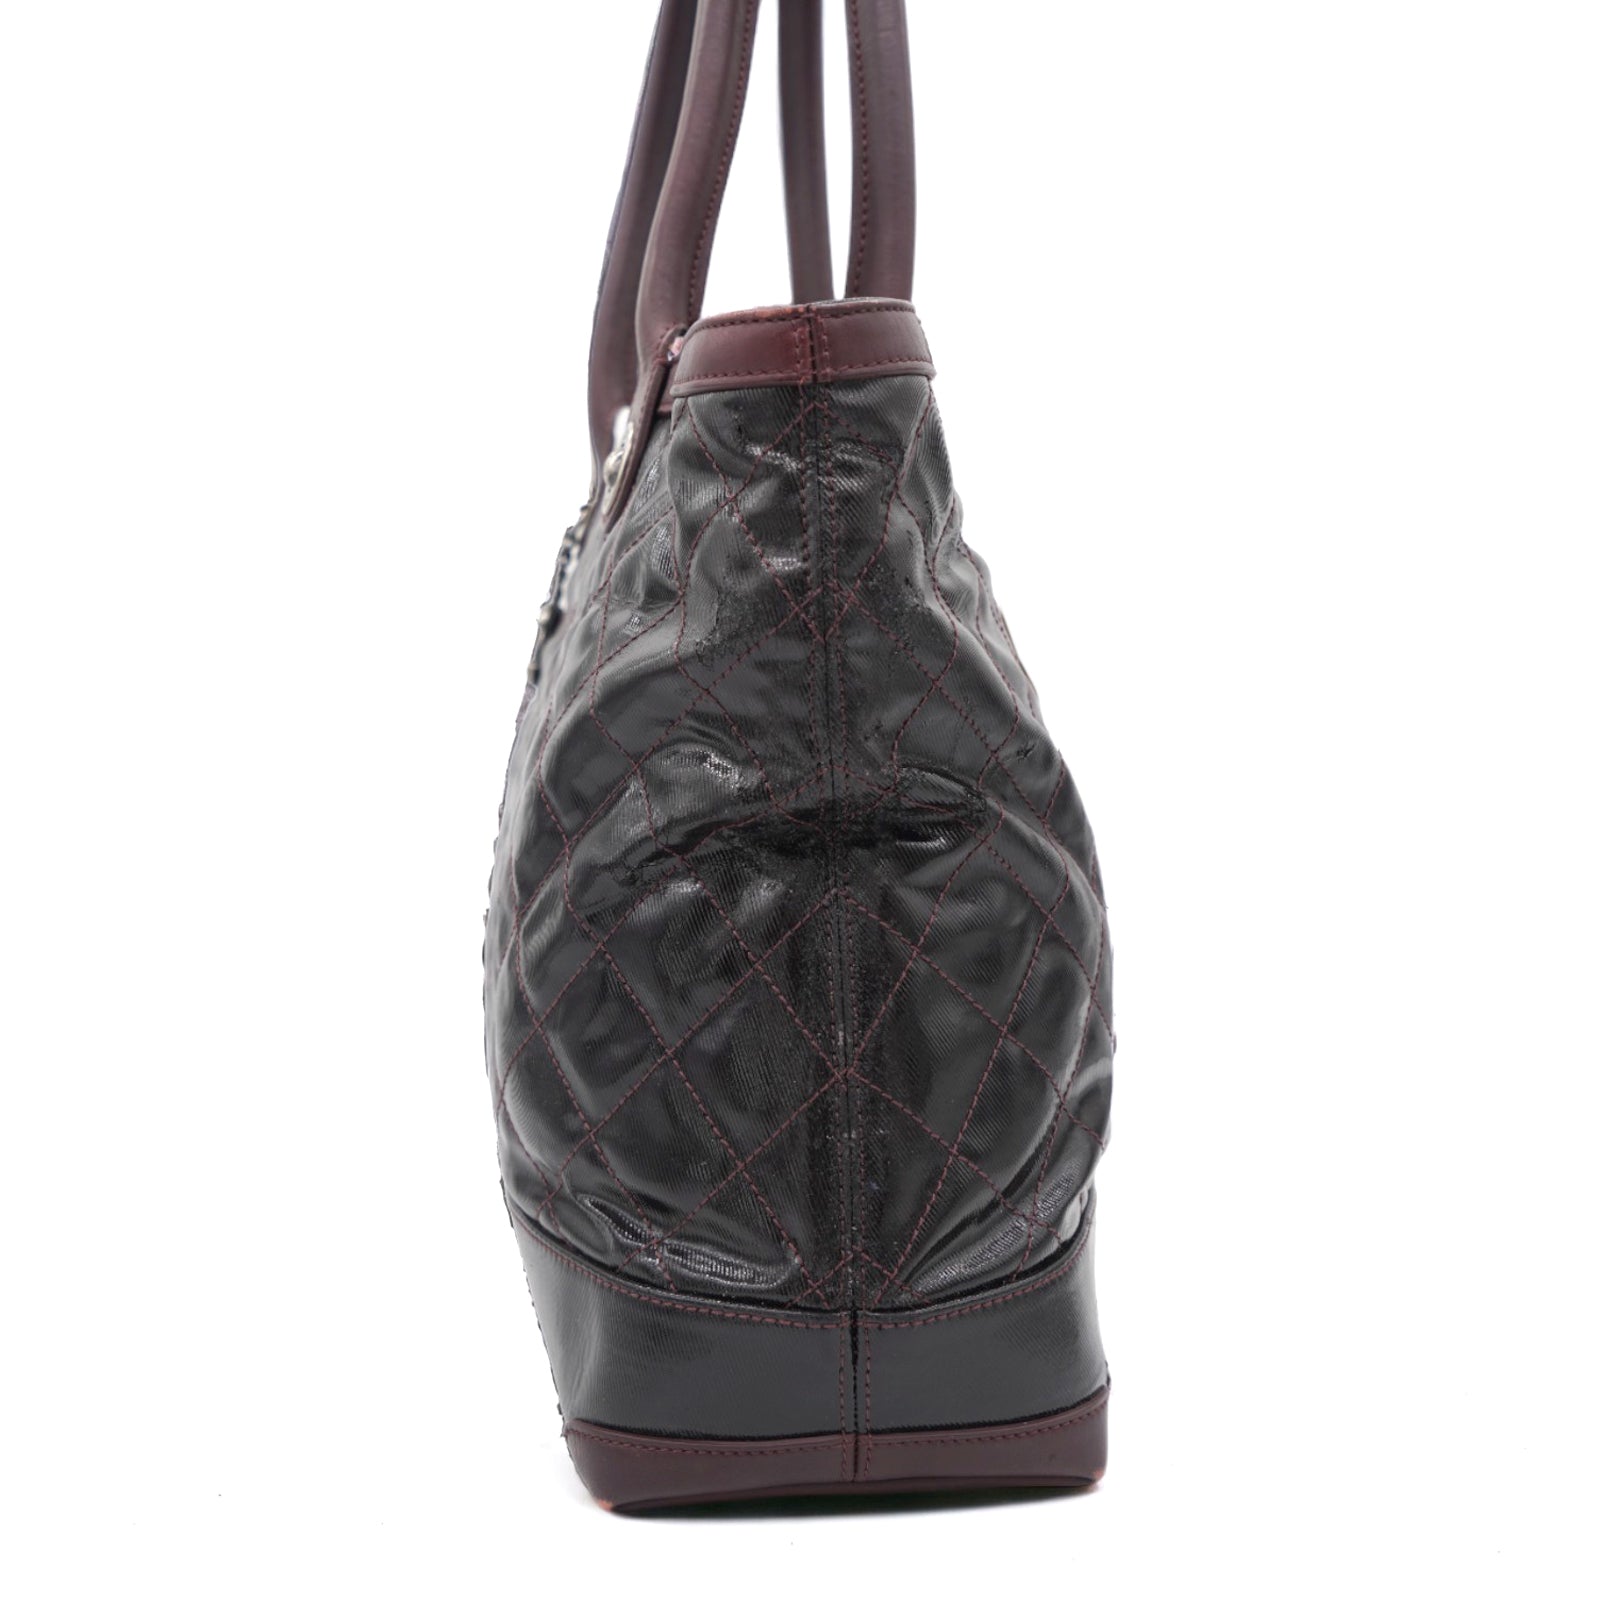 Glazed Quilted Tote Wine